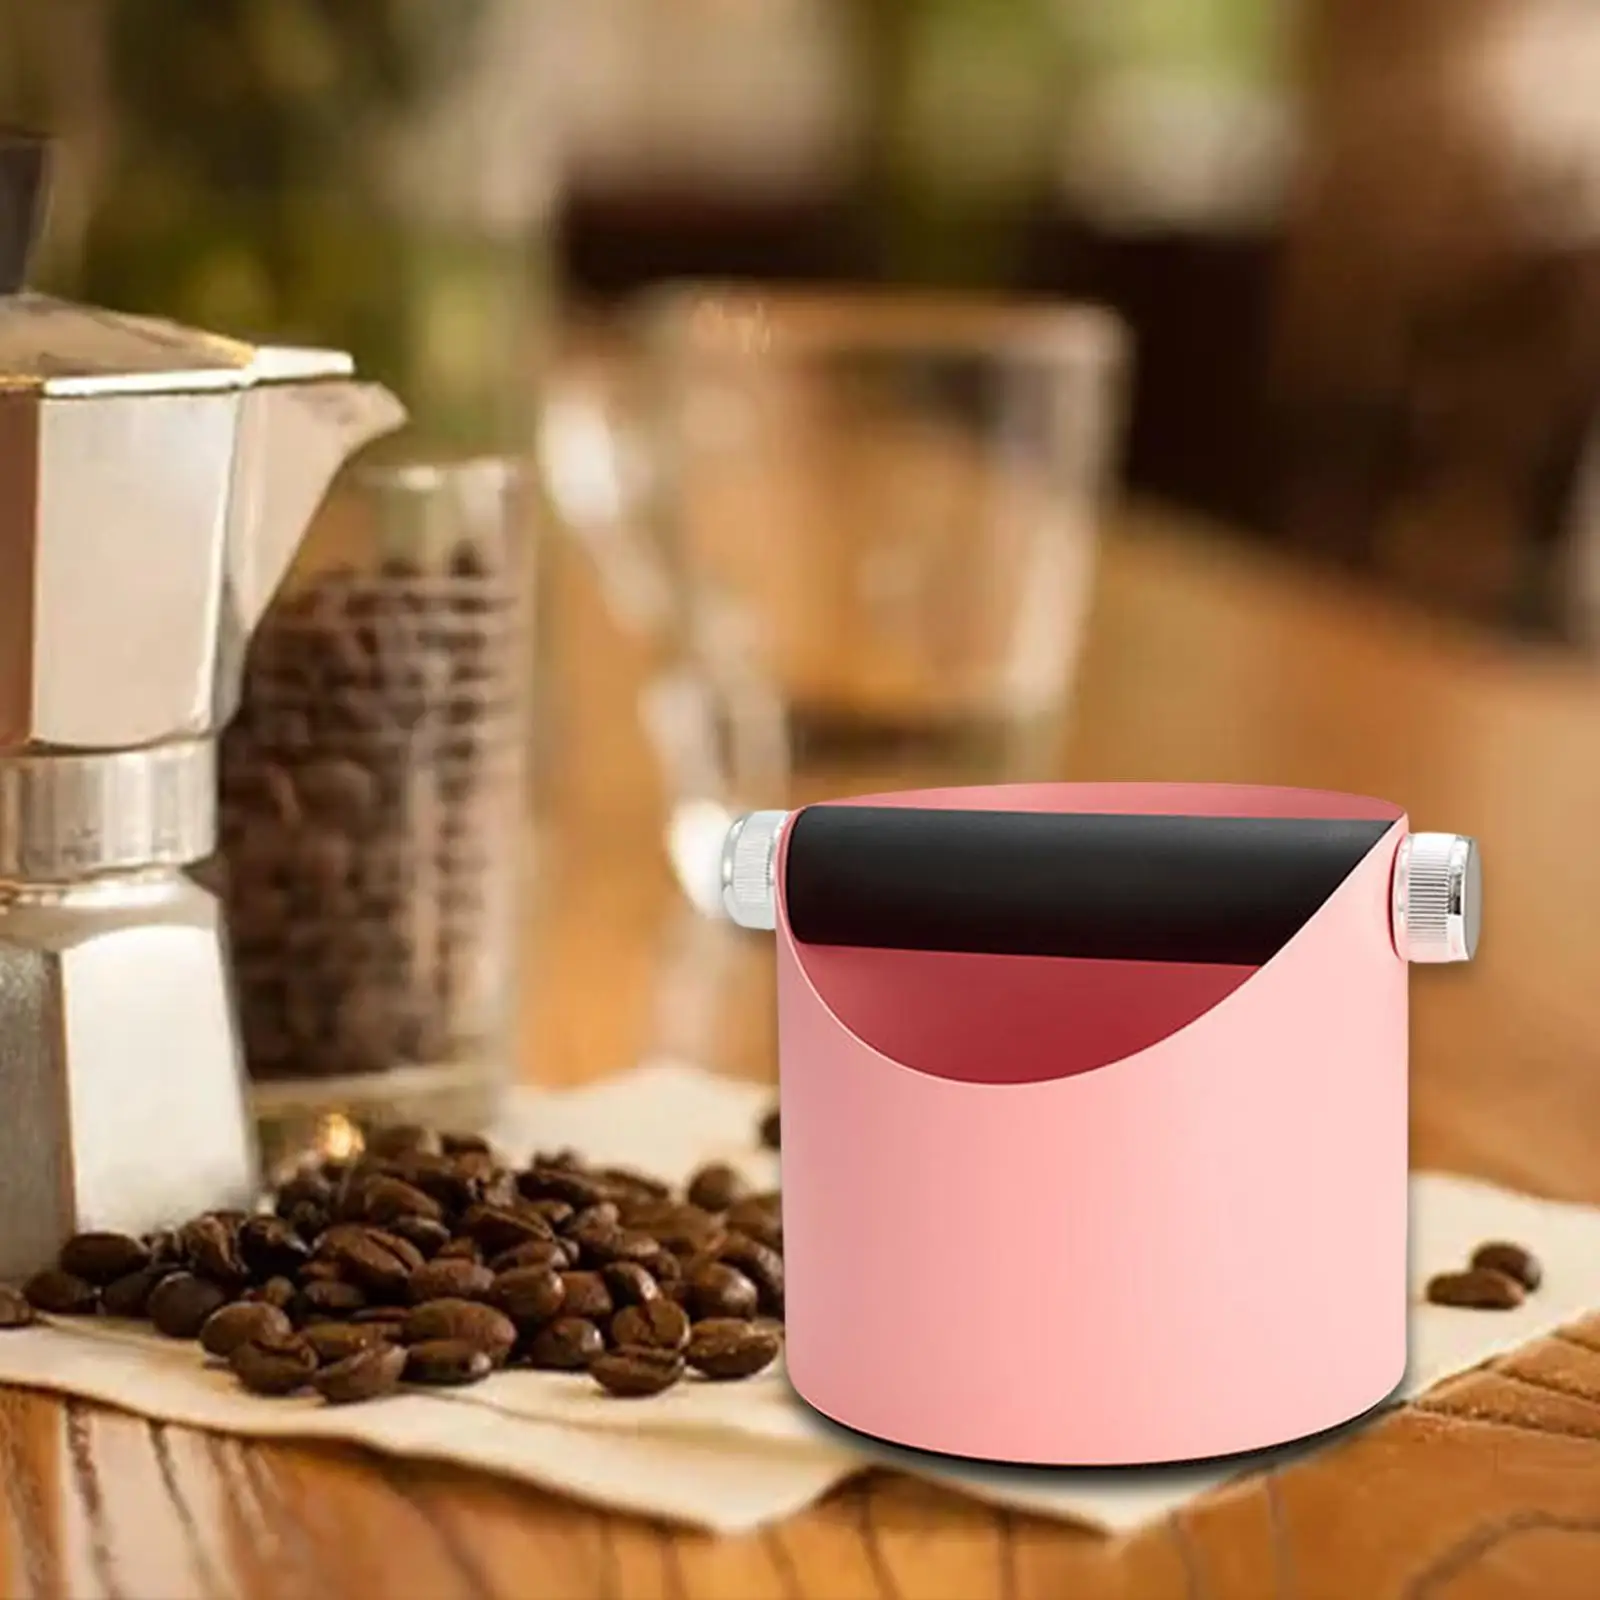 Practical Coffee Grounds Box Dump Bin Nonslip Base Pad Coffee Maker Accs Steel Container for Restaurant Bar Home